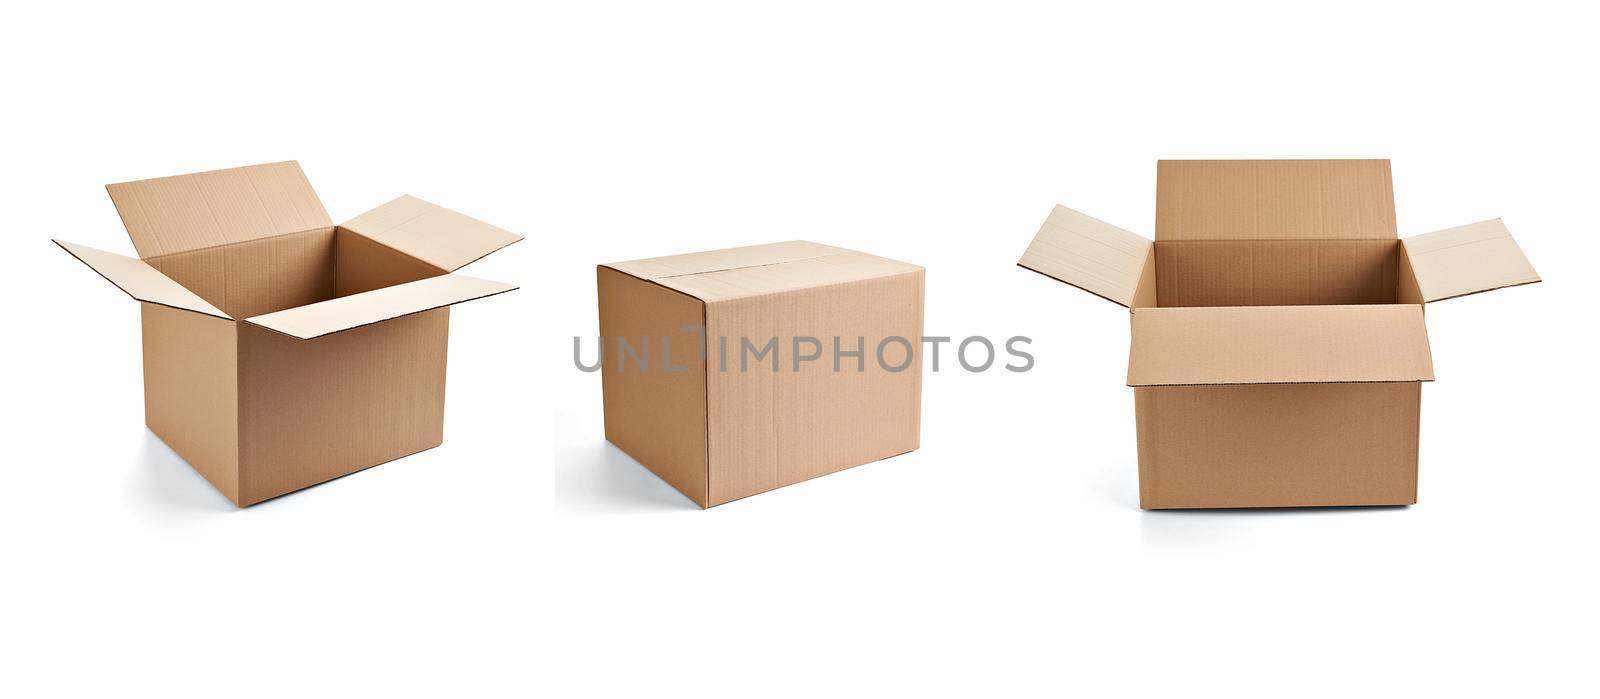 box package delivery cardboard carton shipping packaging gift pack container storage post send transport by Picsfive